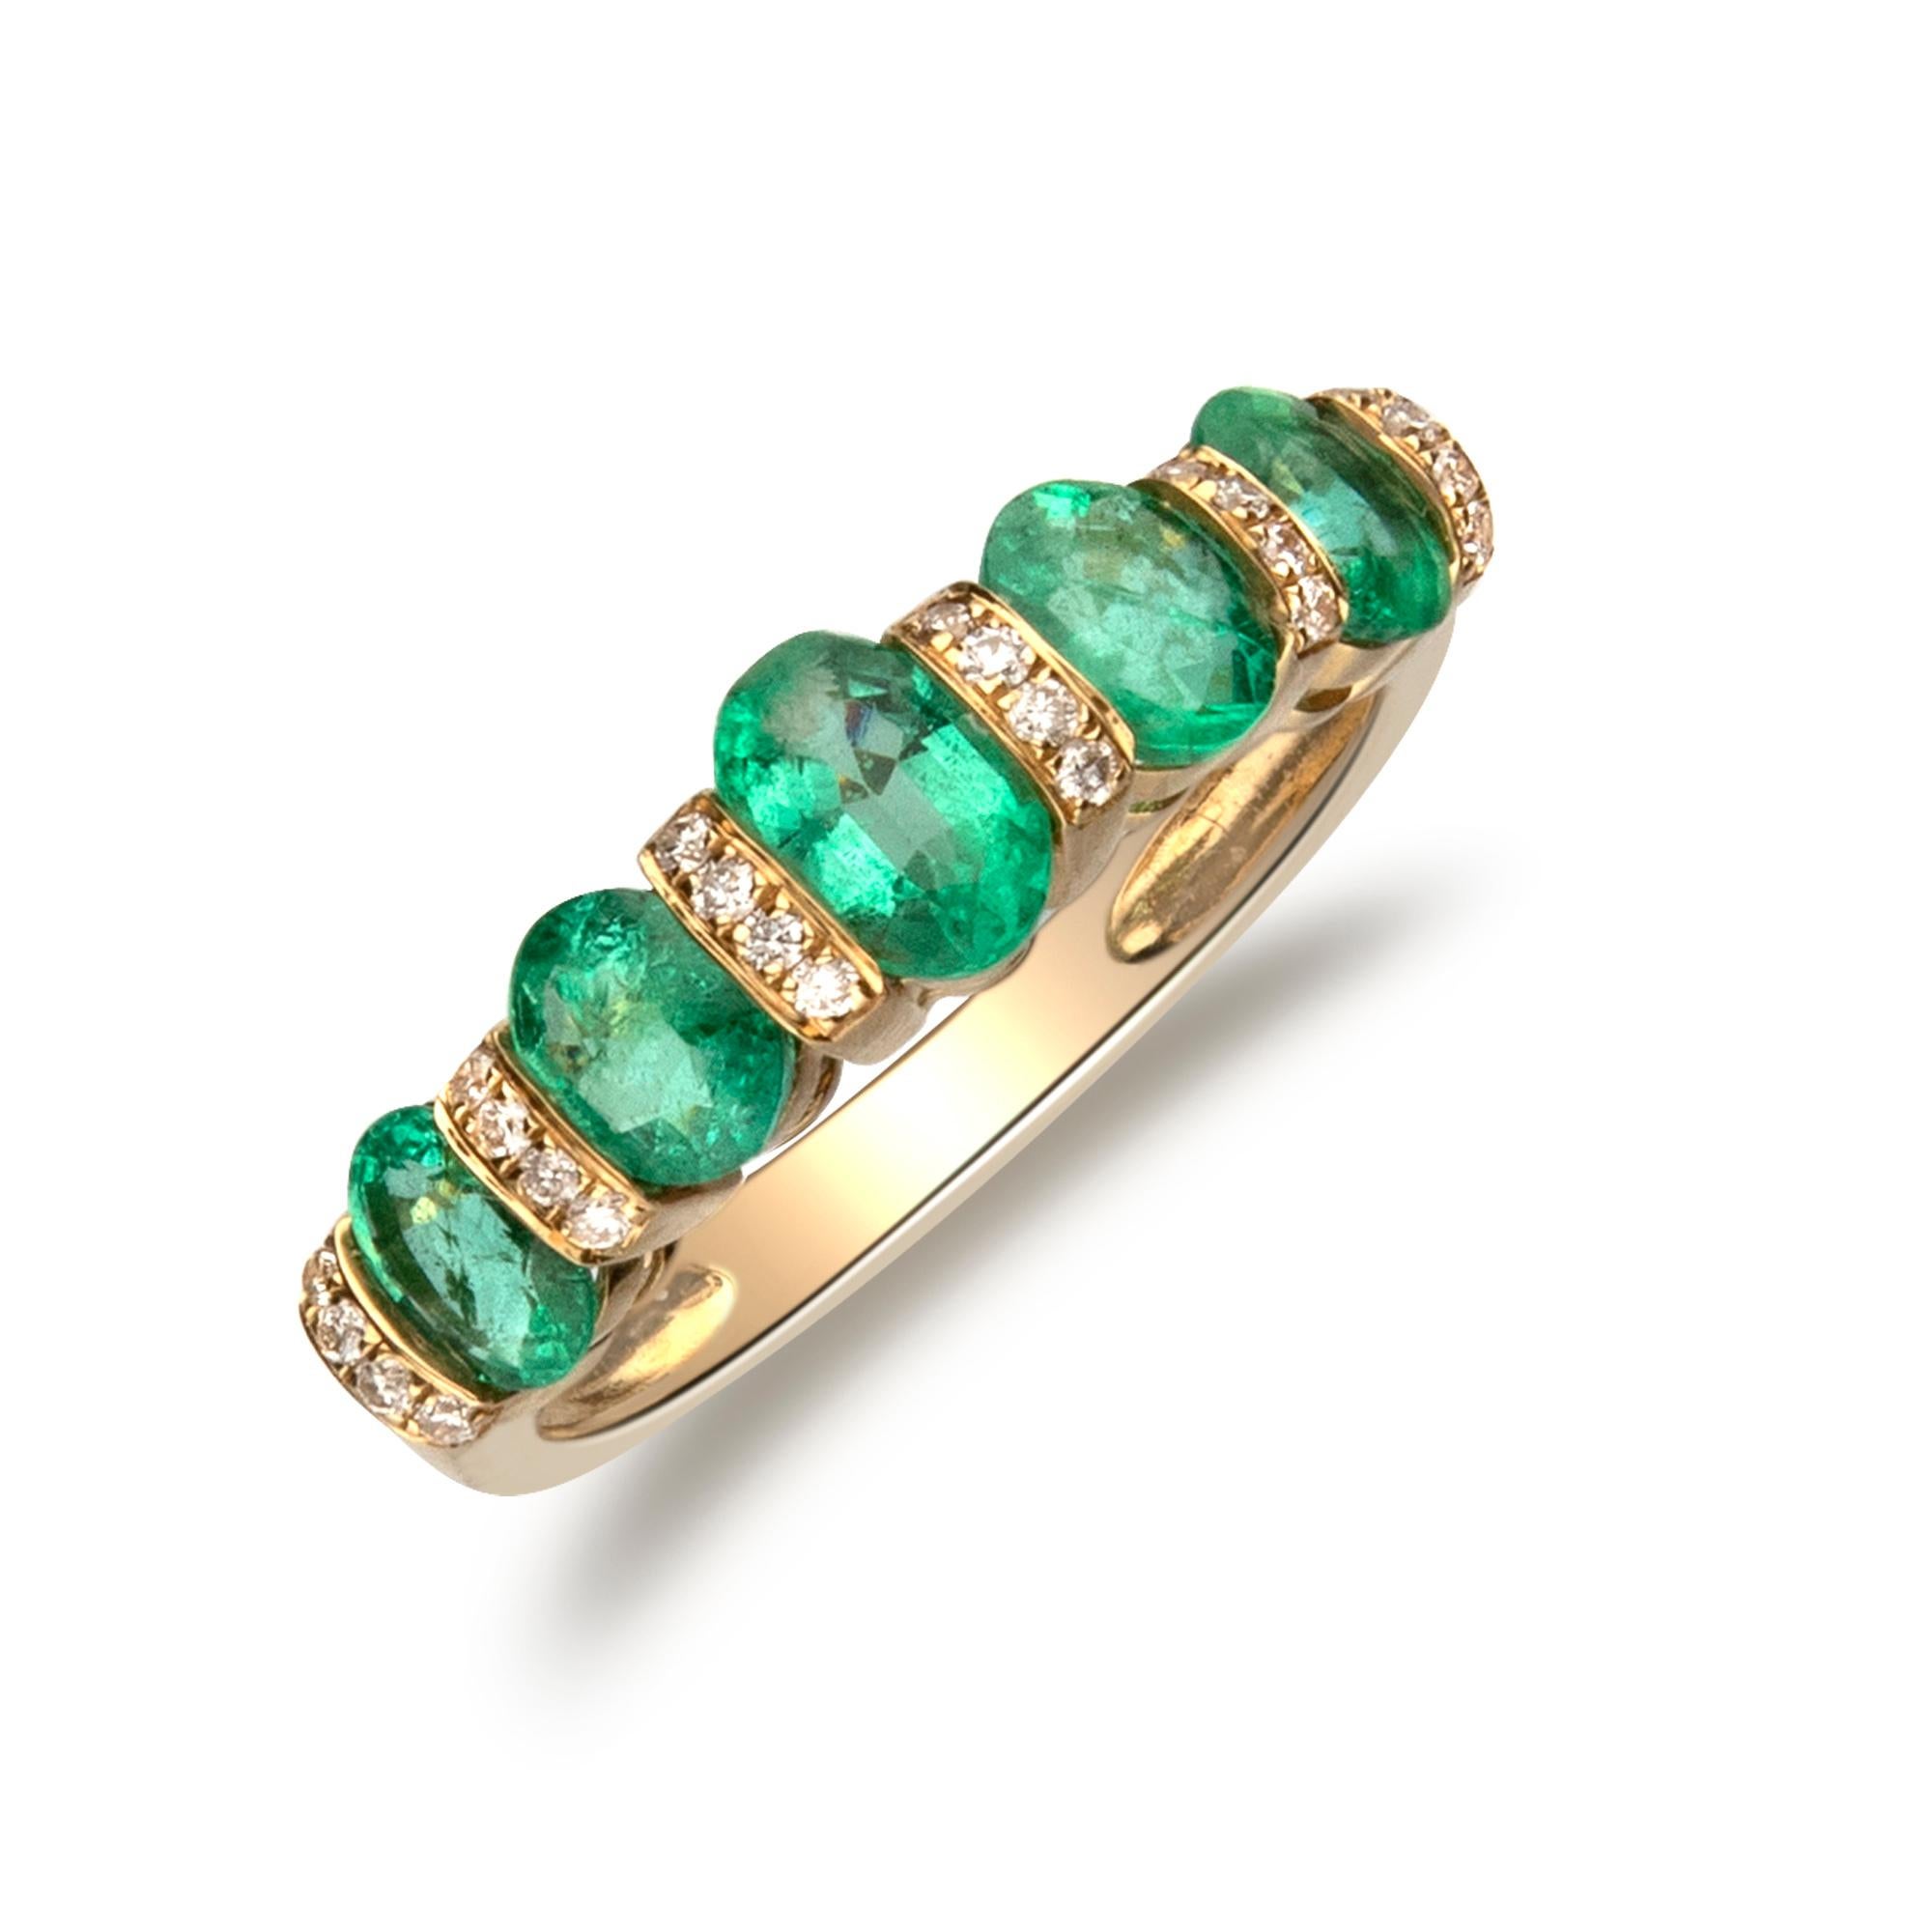 This unique designer band by Gin and Grace is crafted in 14-karat Yellow gold and features an oval cut 0.42 Carat emerald and 4 oval cut emeralds 1.19 Ct. in a prong-setting. This ring also features 24 Round diamonds 0.12 carat in GH-SI quality.